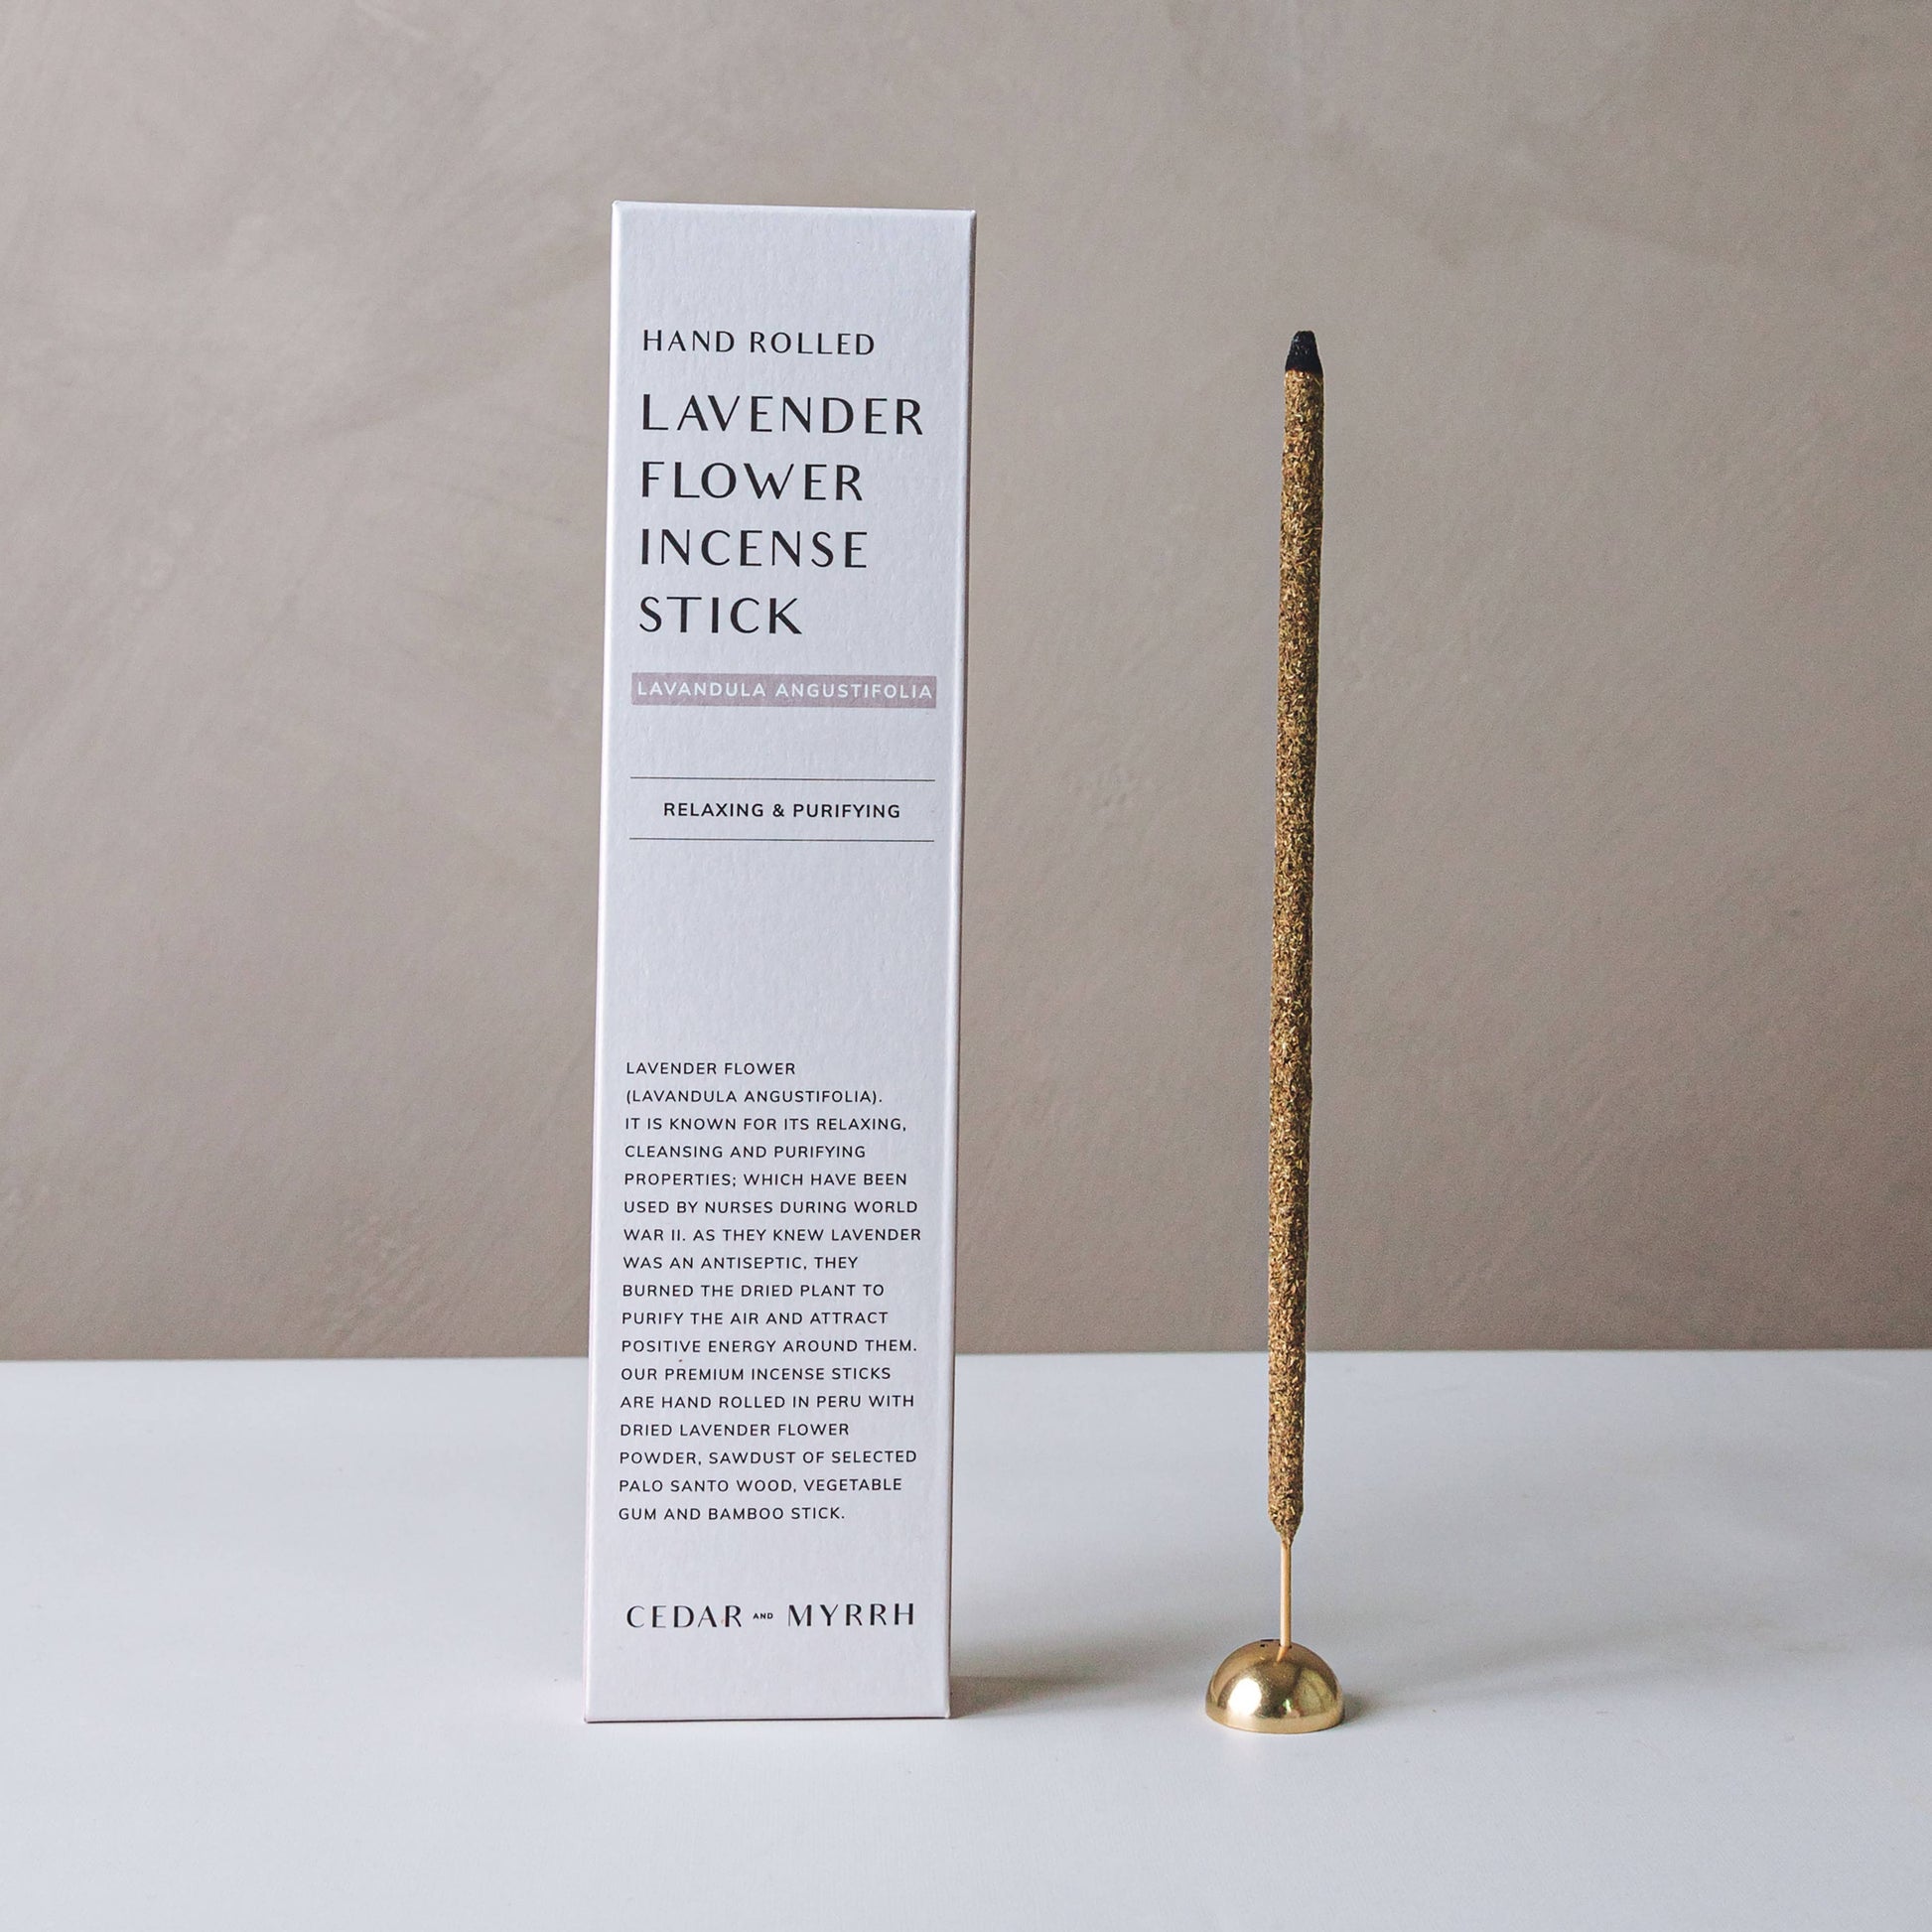 [Burning Ritual] Hand Rolled Lavender Flower Incense Stick - The Crowd Went Wild